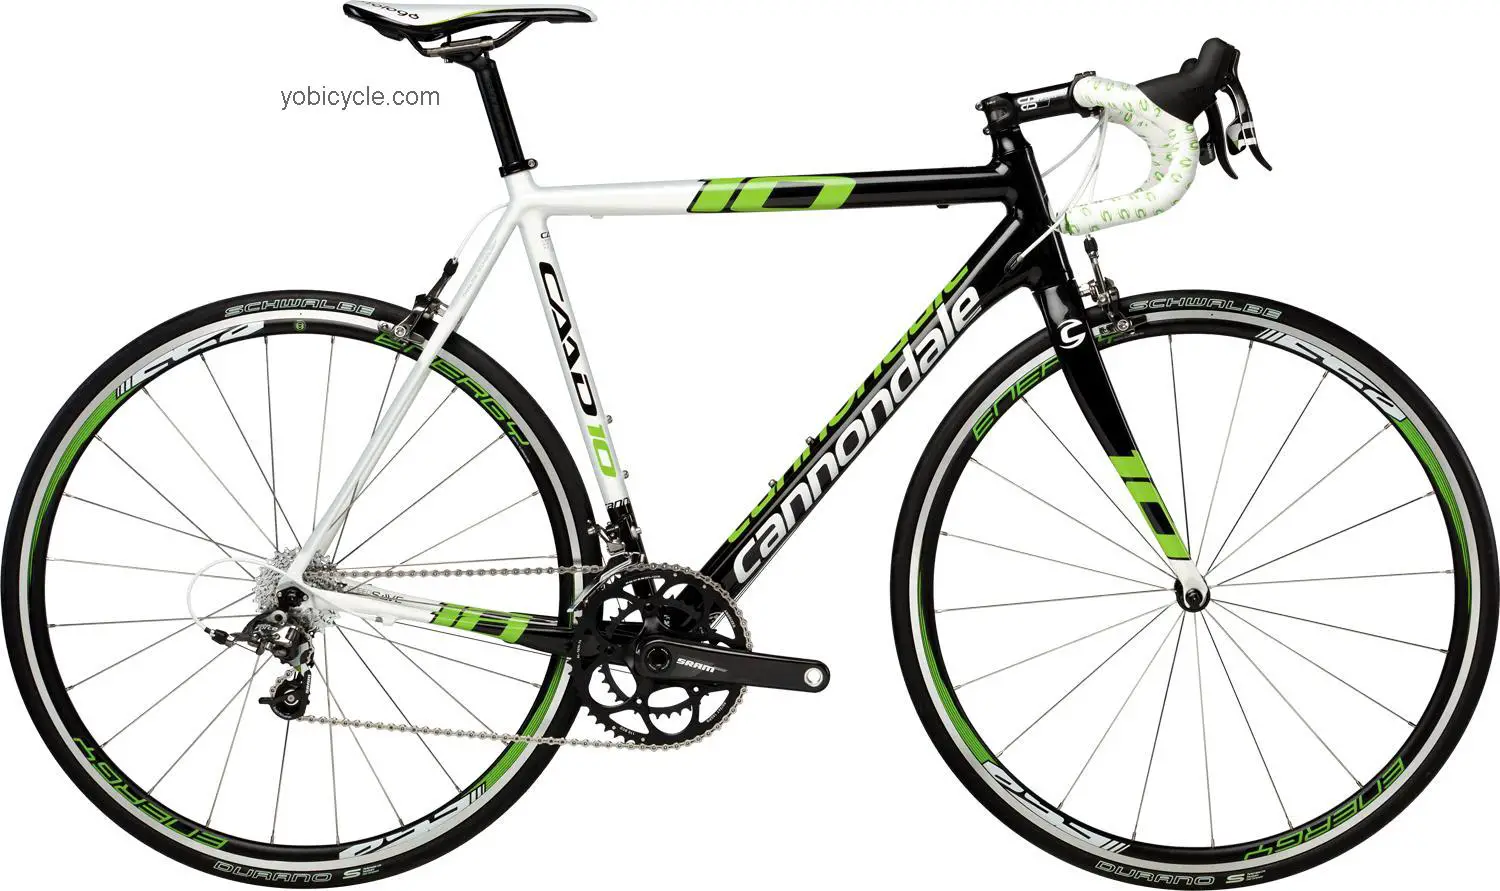 Cannondale CAAD10 2 Force Racing 2013 comparison online with competitors